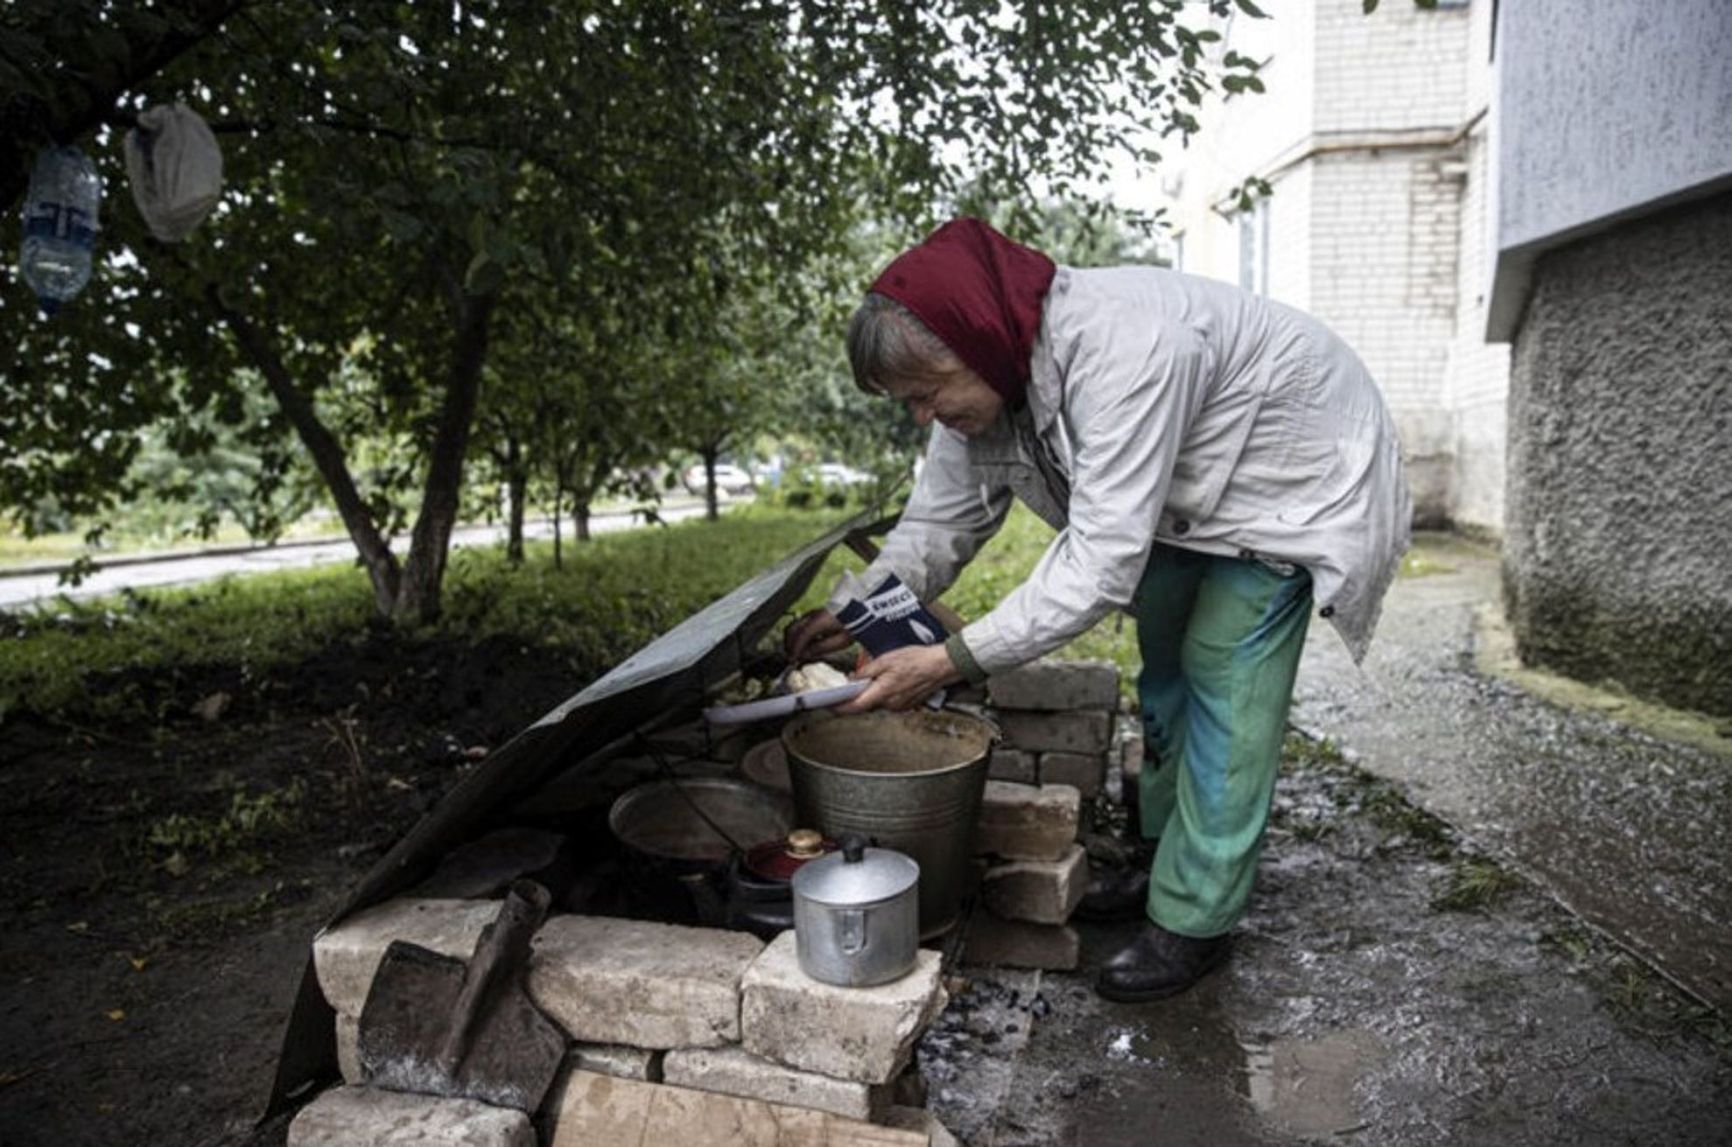 A woman in Kupiansk cooking food outside her apartment block